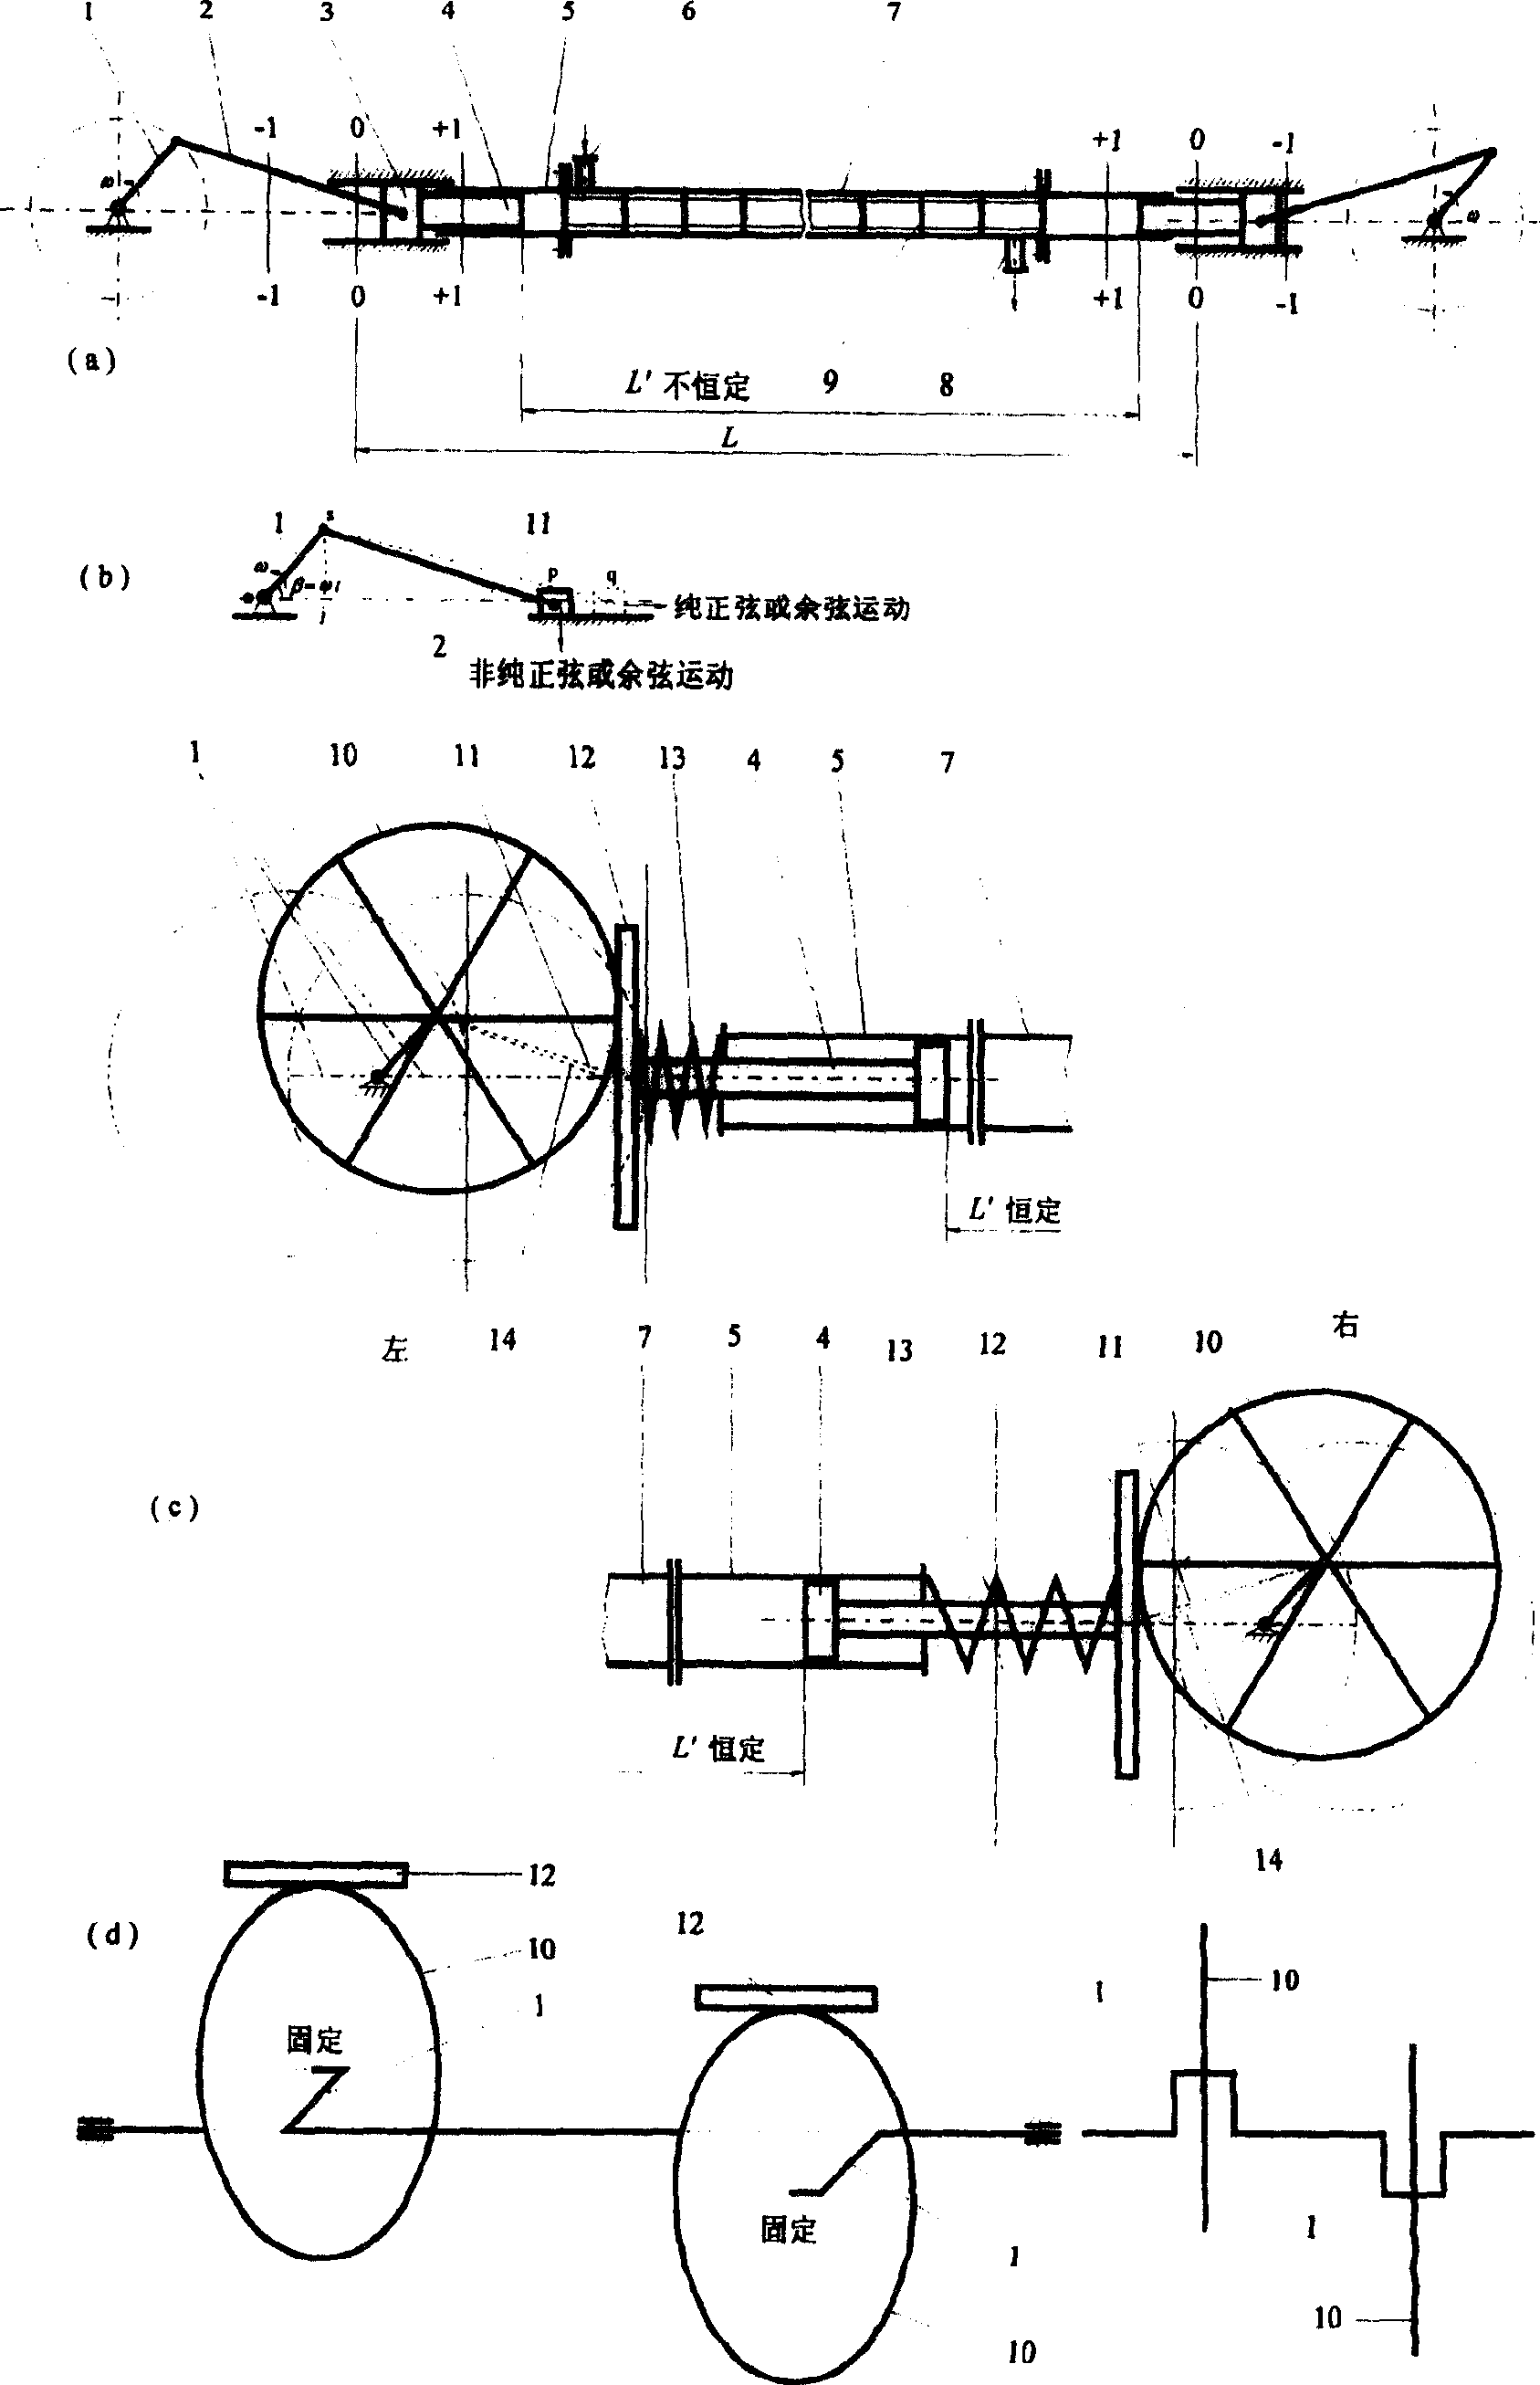 Crank link rod mechanism with variable length link rod